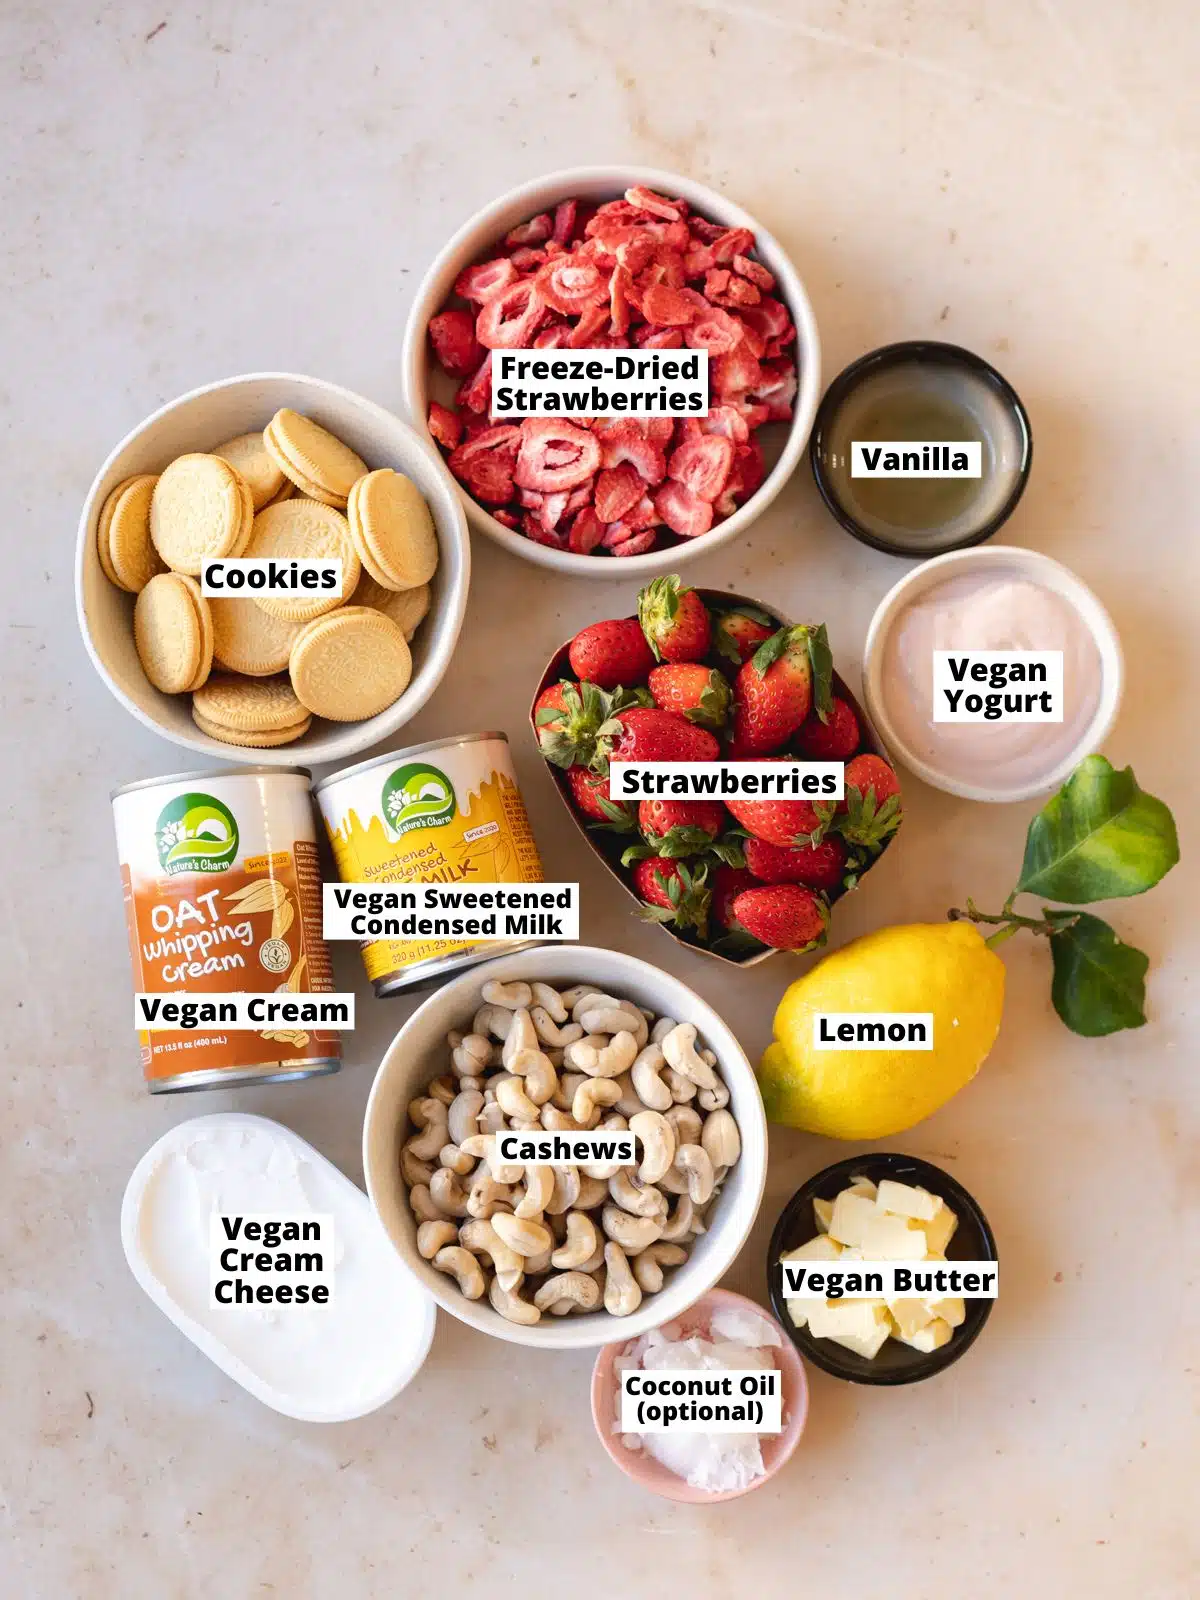 ingredients for vegan strawberry cheesecake measured in bowls on a peach marble surface.